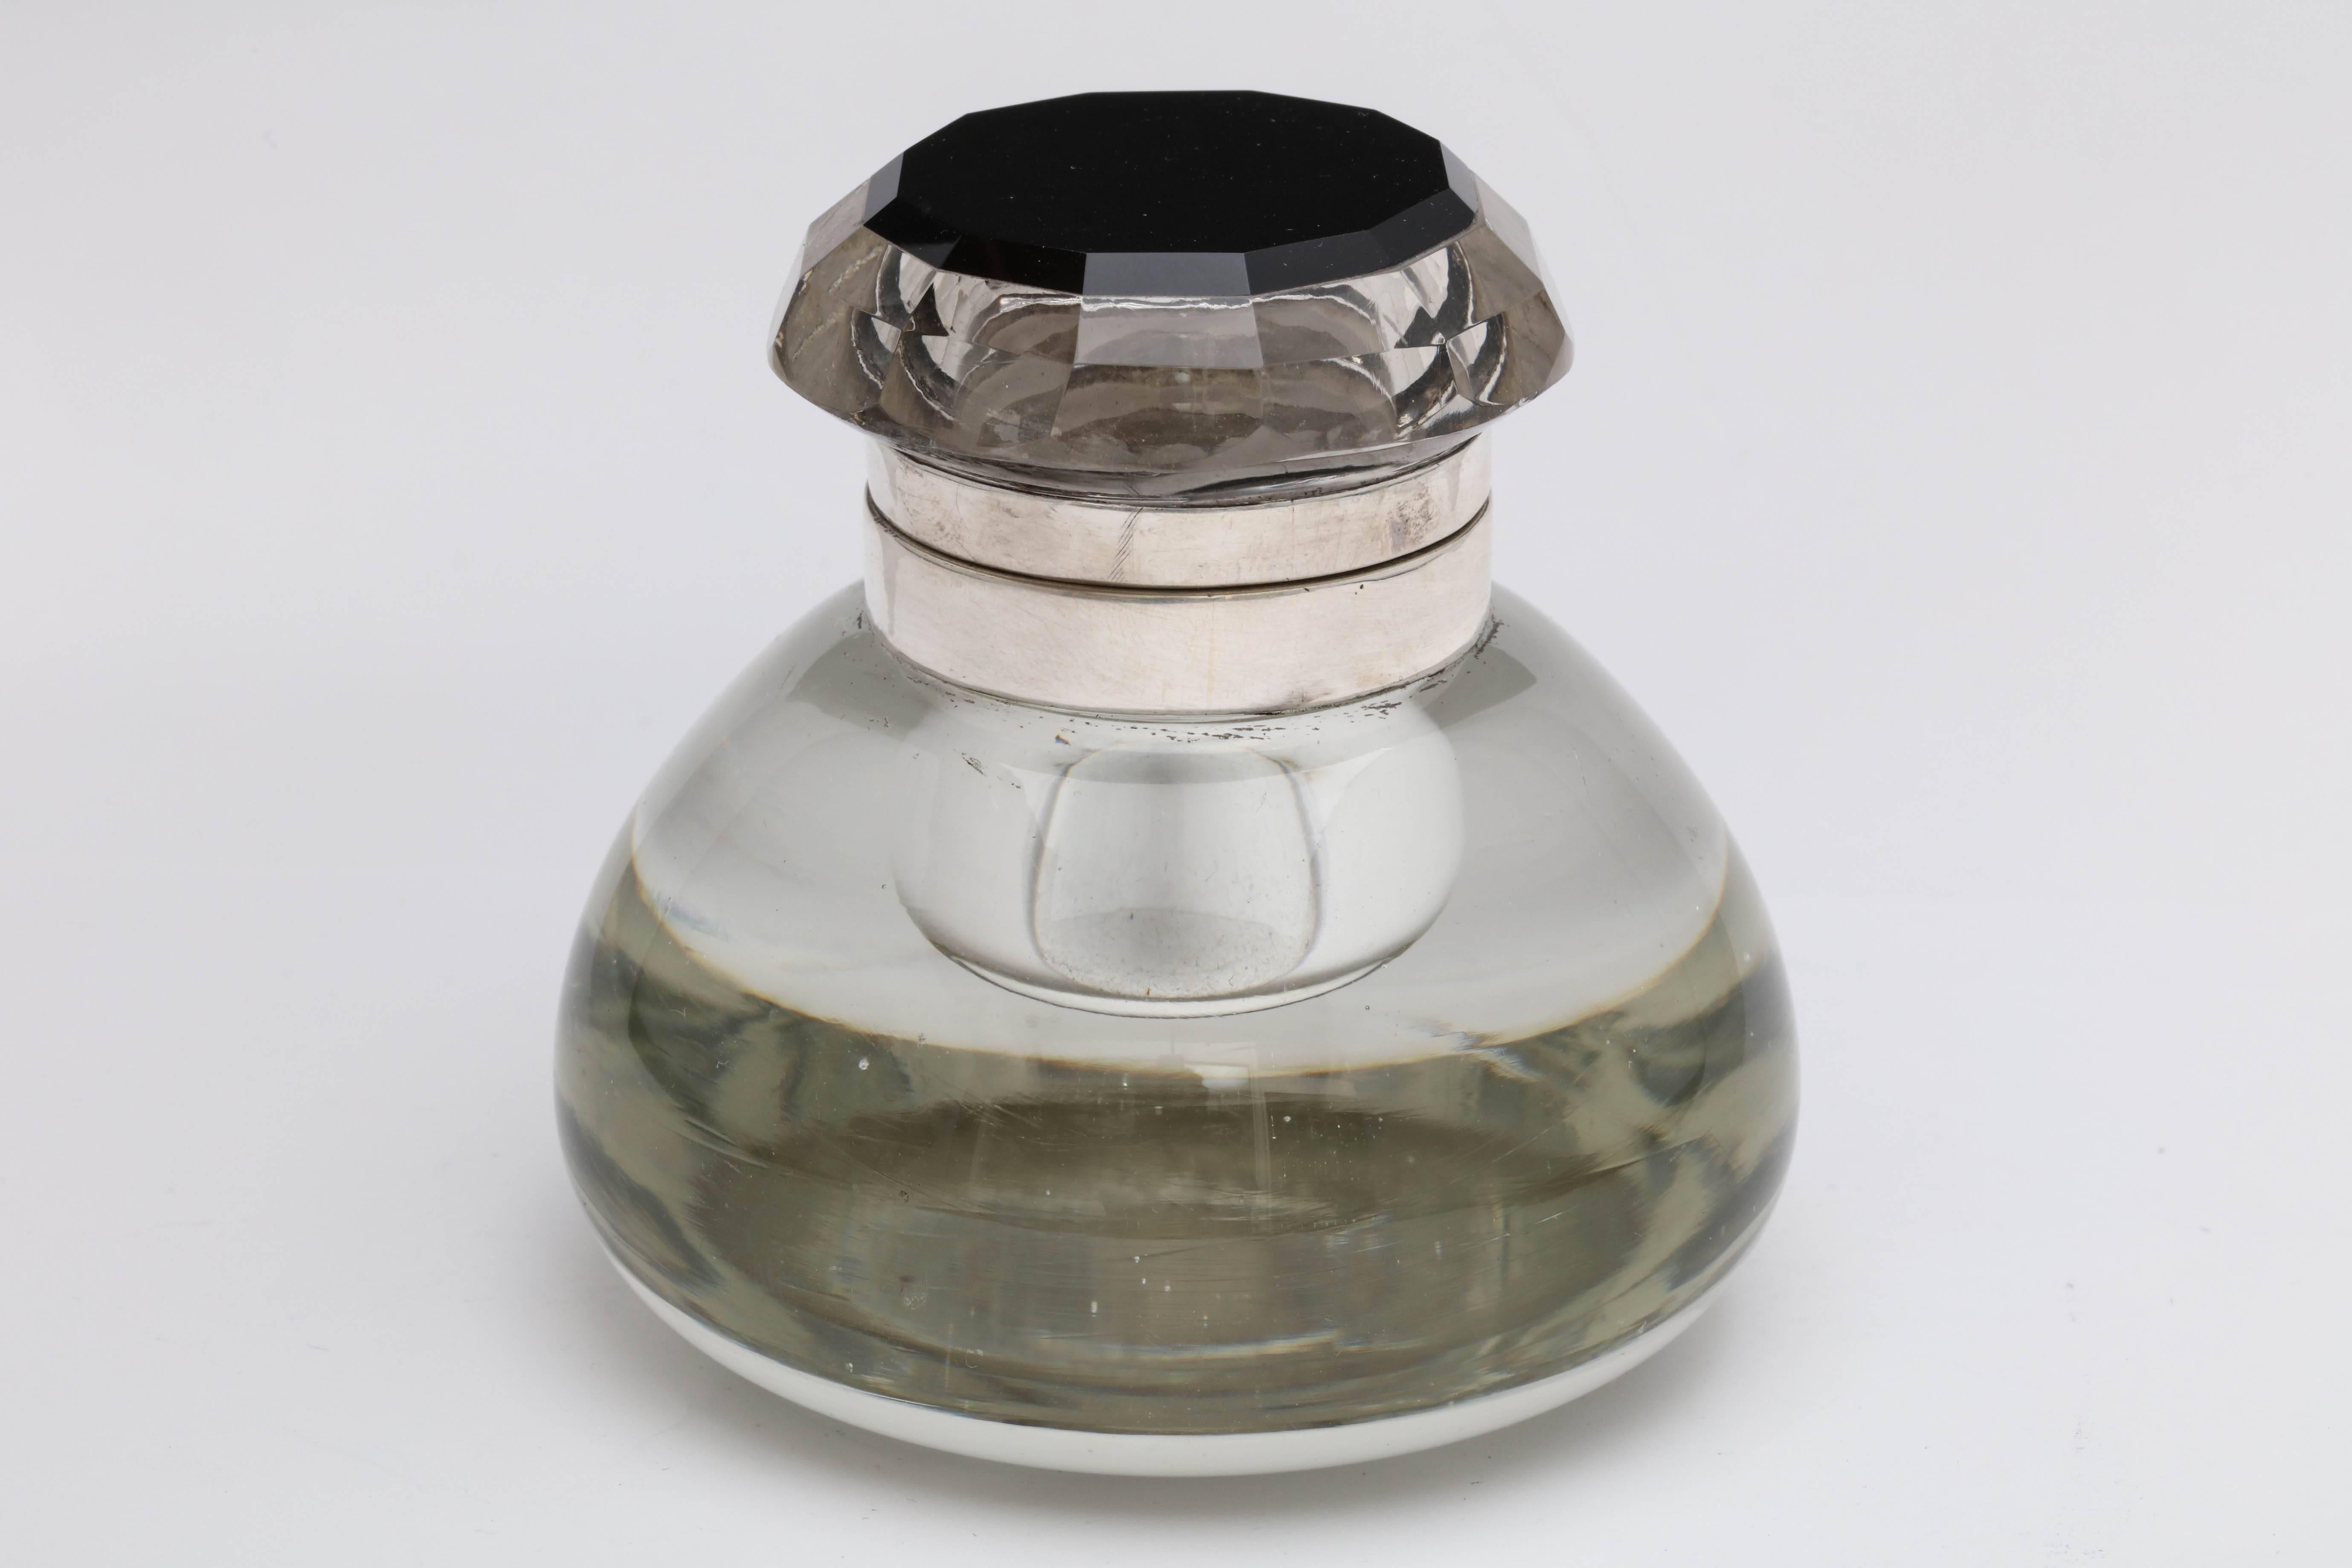 Unusual, sterling silver and black onyx-mounted hinged crystal inkwell, American, circa 1920s-1930s. 12-sided, faceted, clear crystal lid is mounted by a 12-sided piece of black onyx. Underside of lid and rim mount are sterling silver. Measures 3